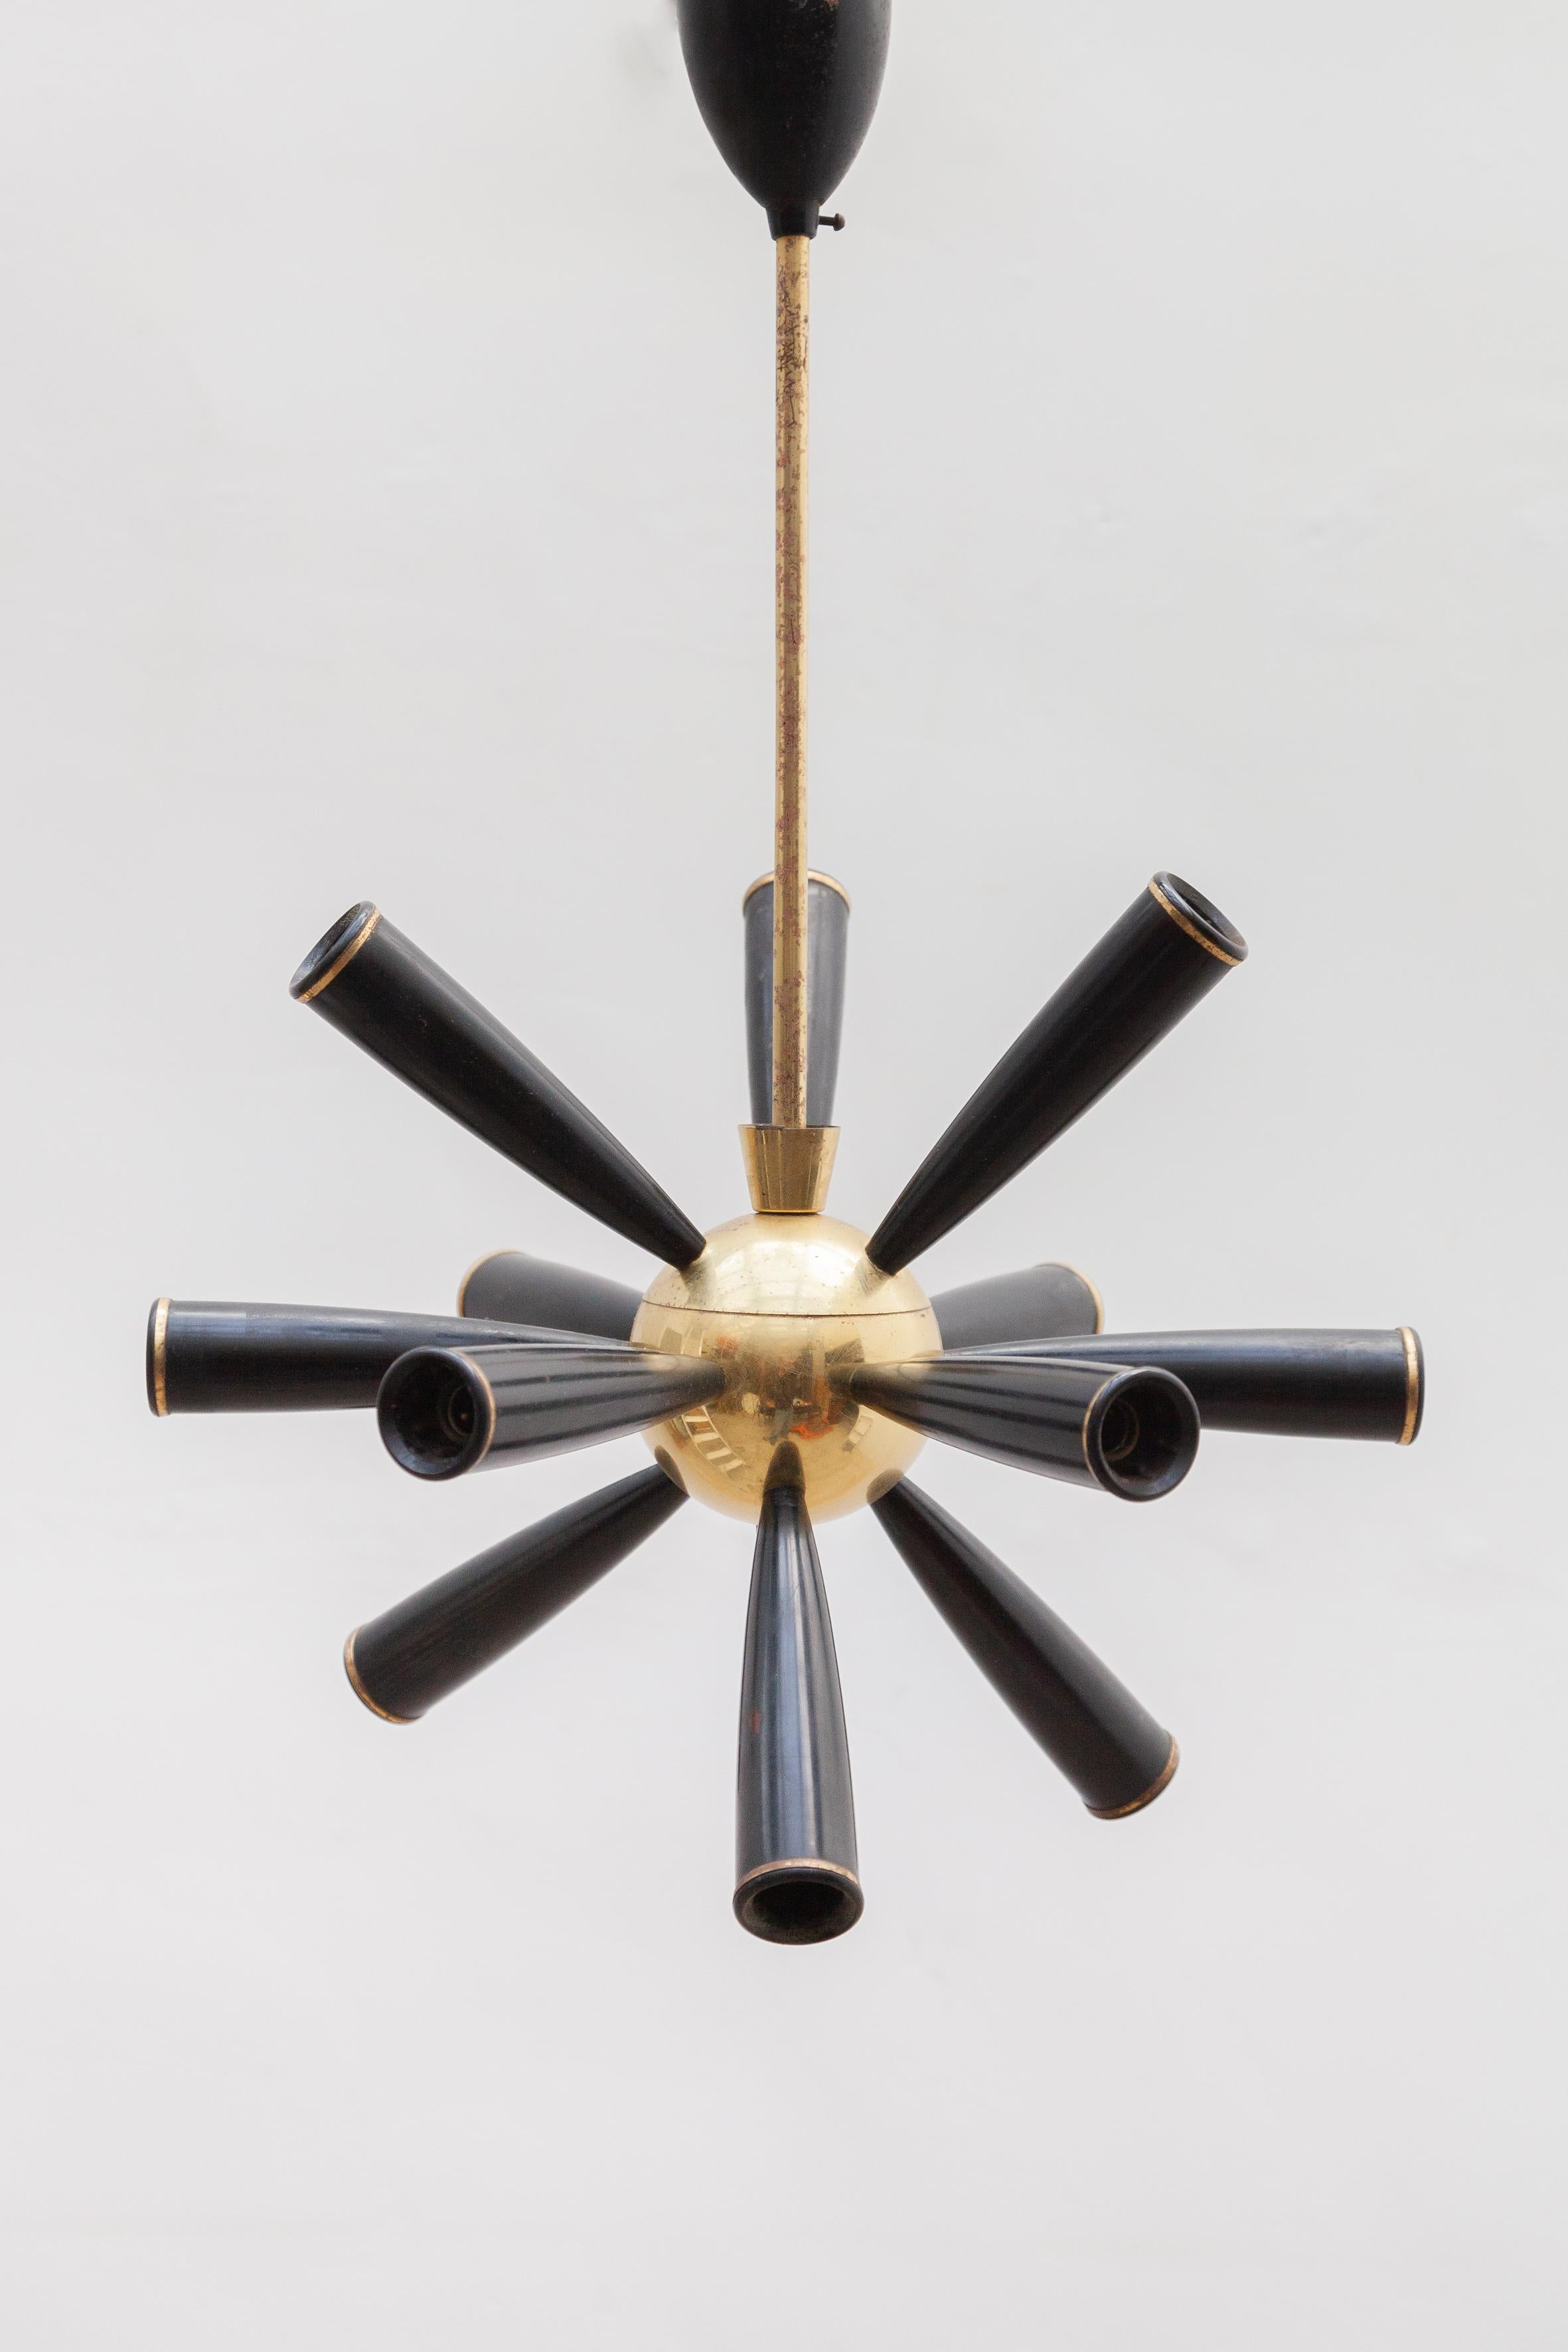 1950s excellent massive Sputnik chandelier attributed to Stilnovo with a brass frame and 12 metal black lacquered shades lights. In addition to the arms with bulbs giving this chandelier a very dynamic 'star burst' quality. Very nice original